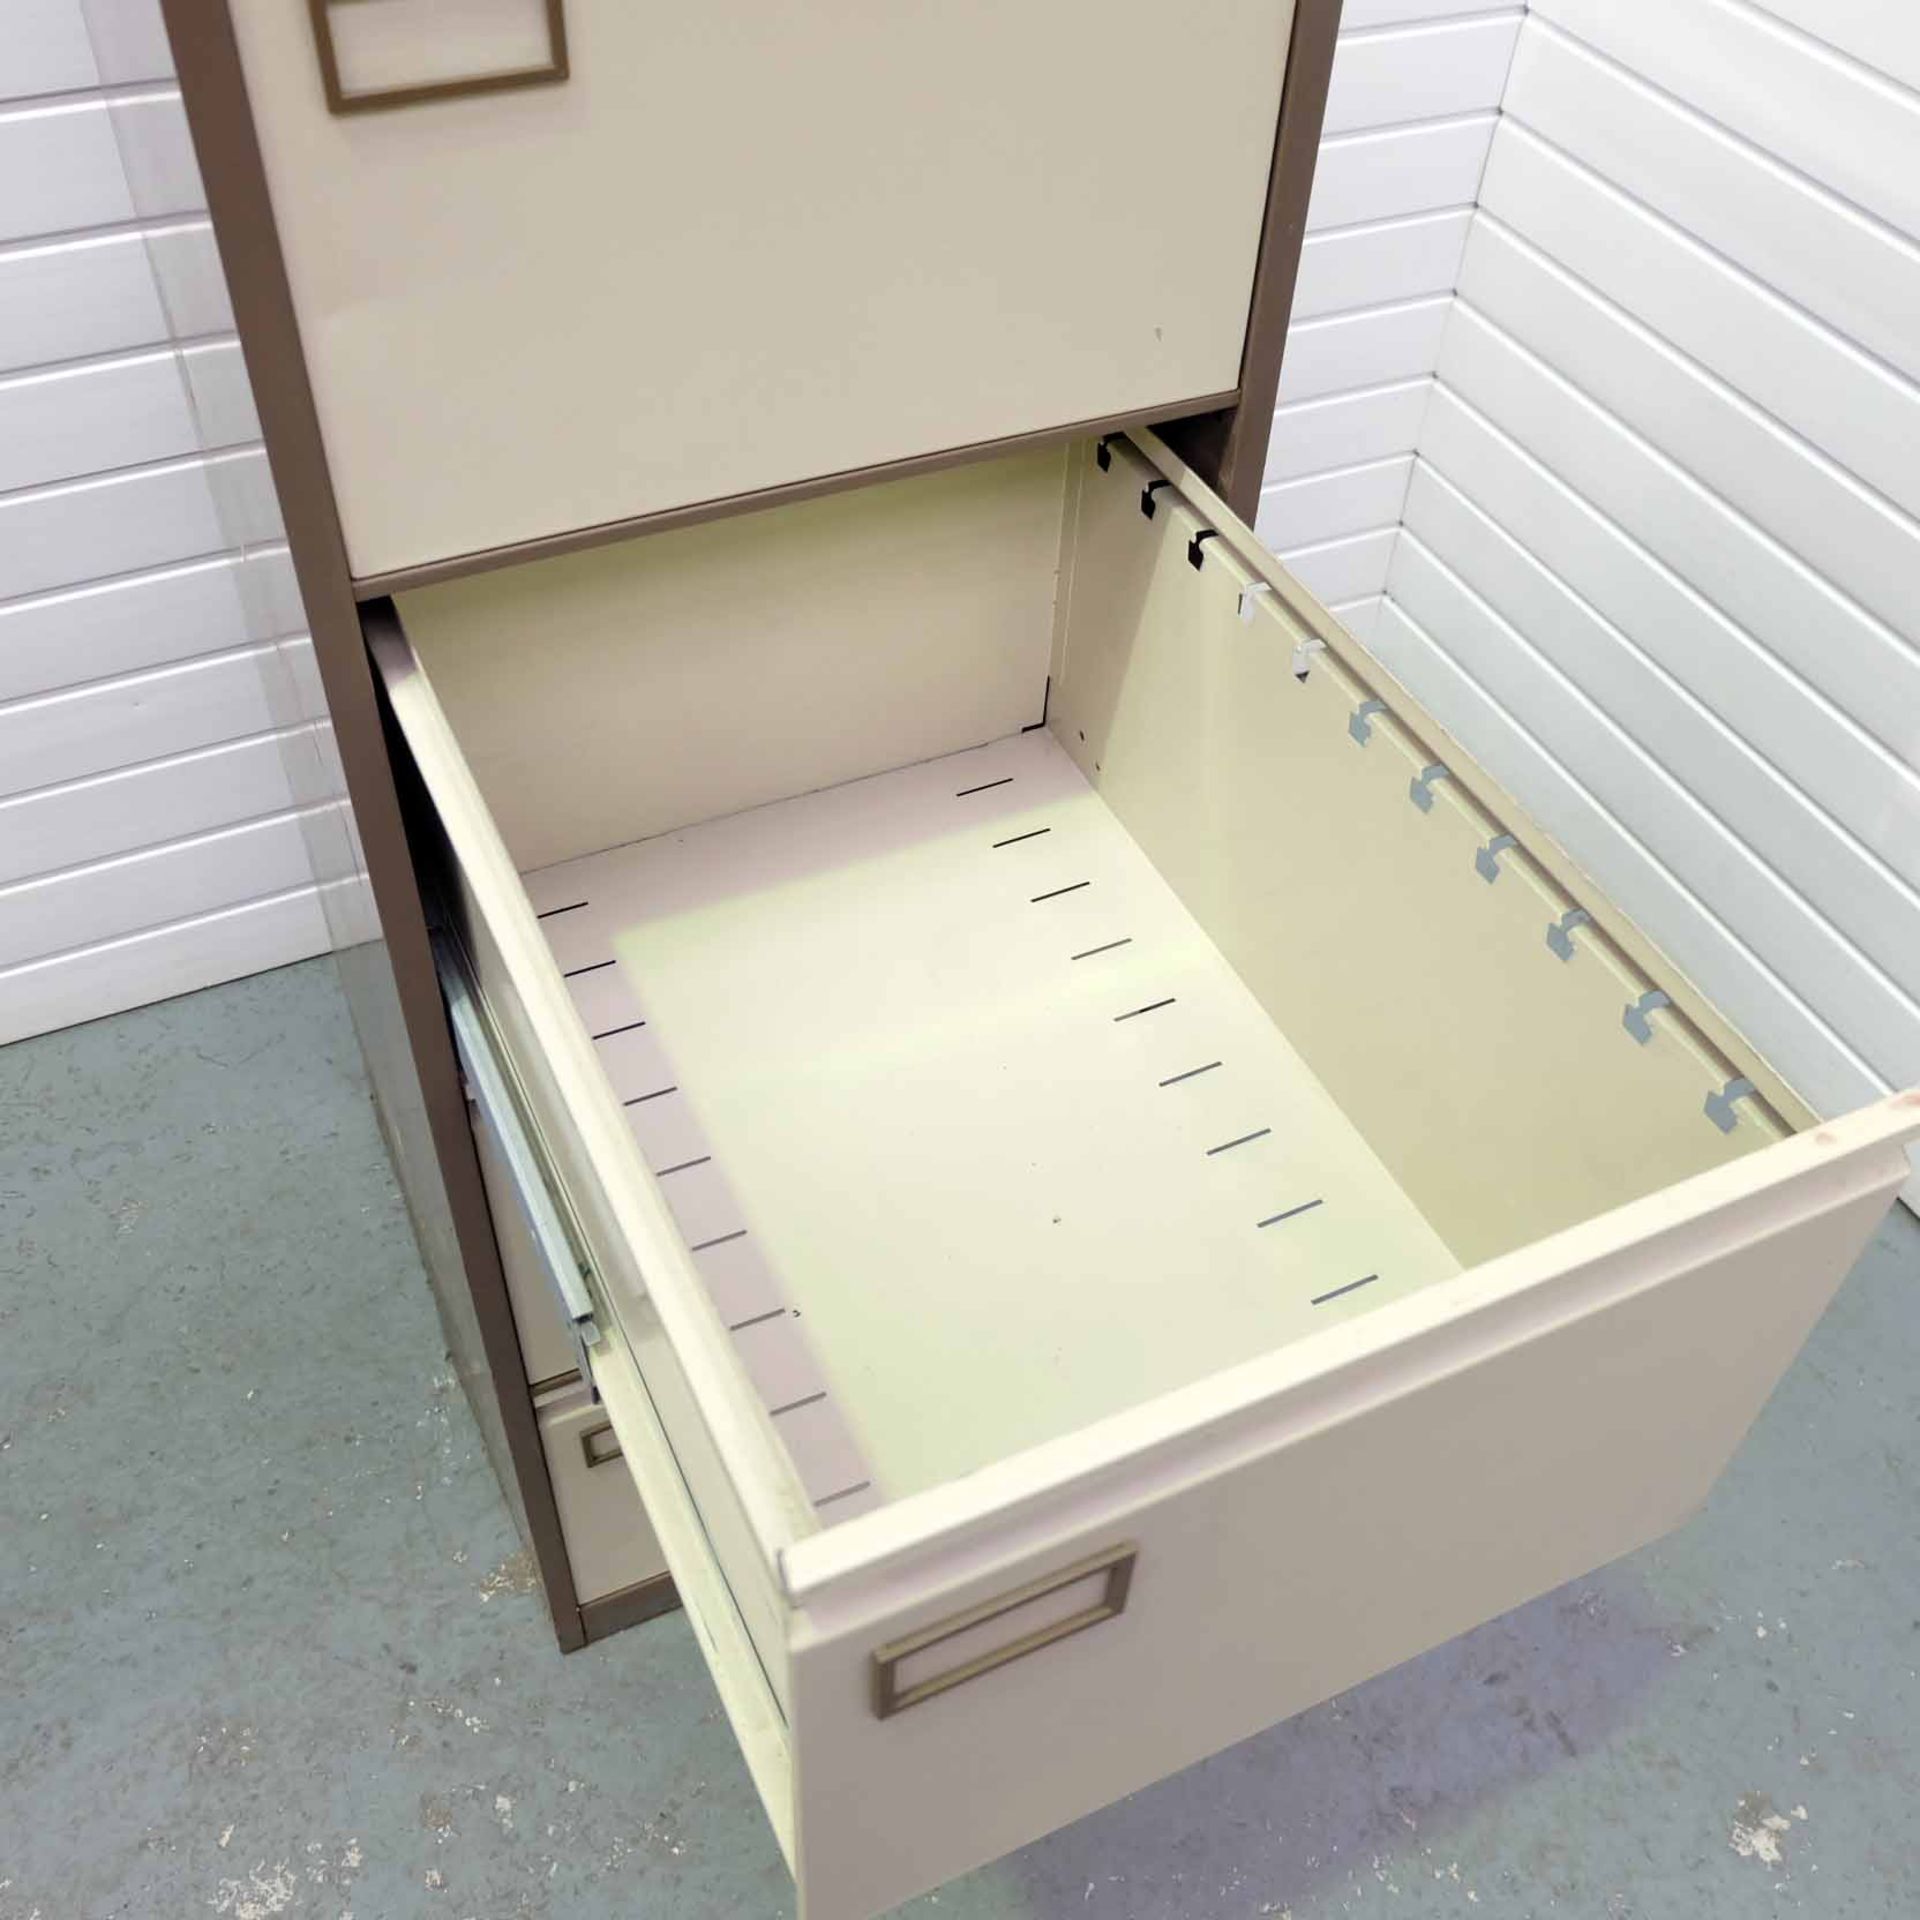 Vickers Trimline 4 Drawer Steel Filing Cabinet. Size 470mm x 620mm. Height 1320mm. - Image 4 of 4